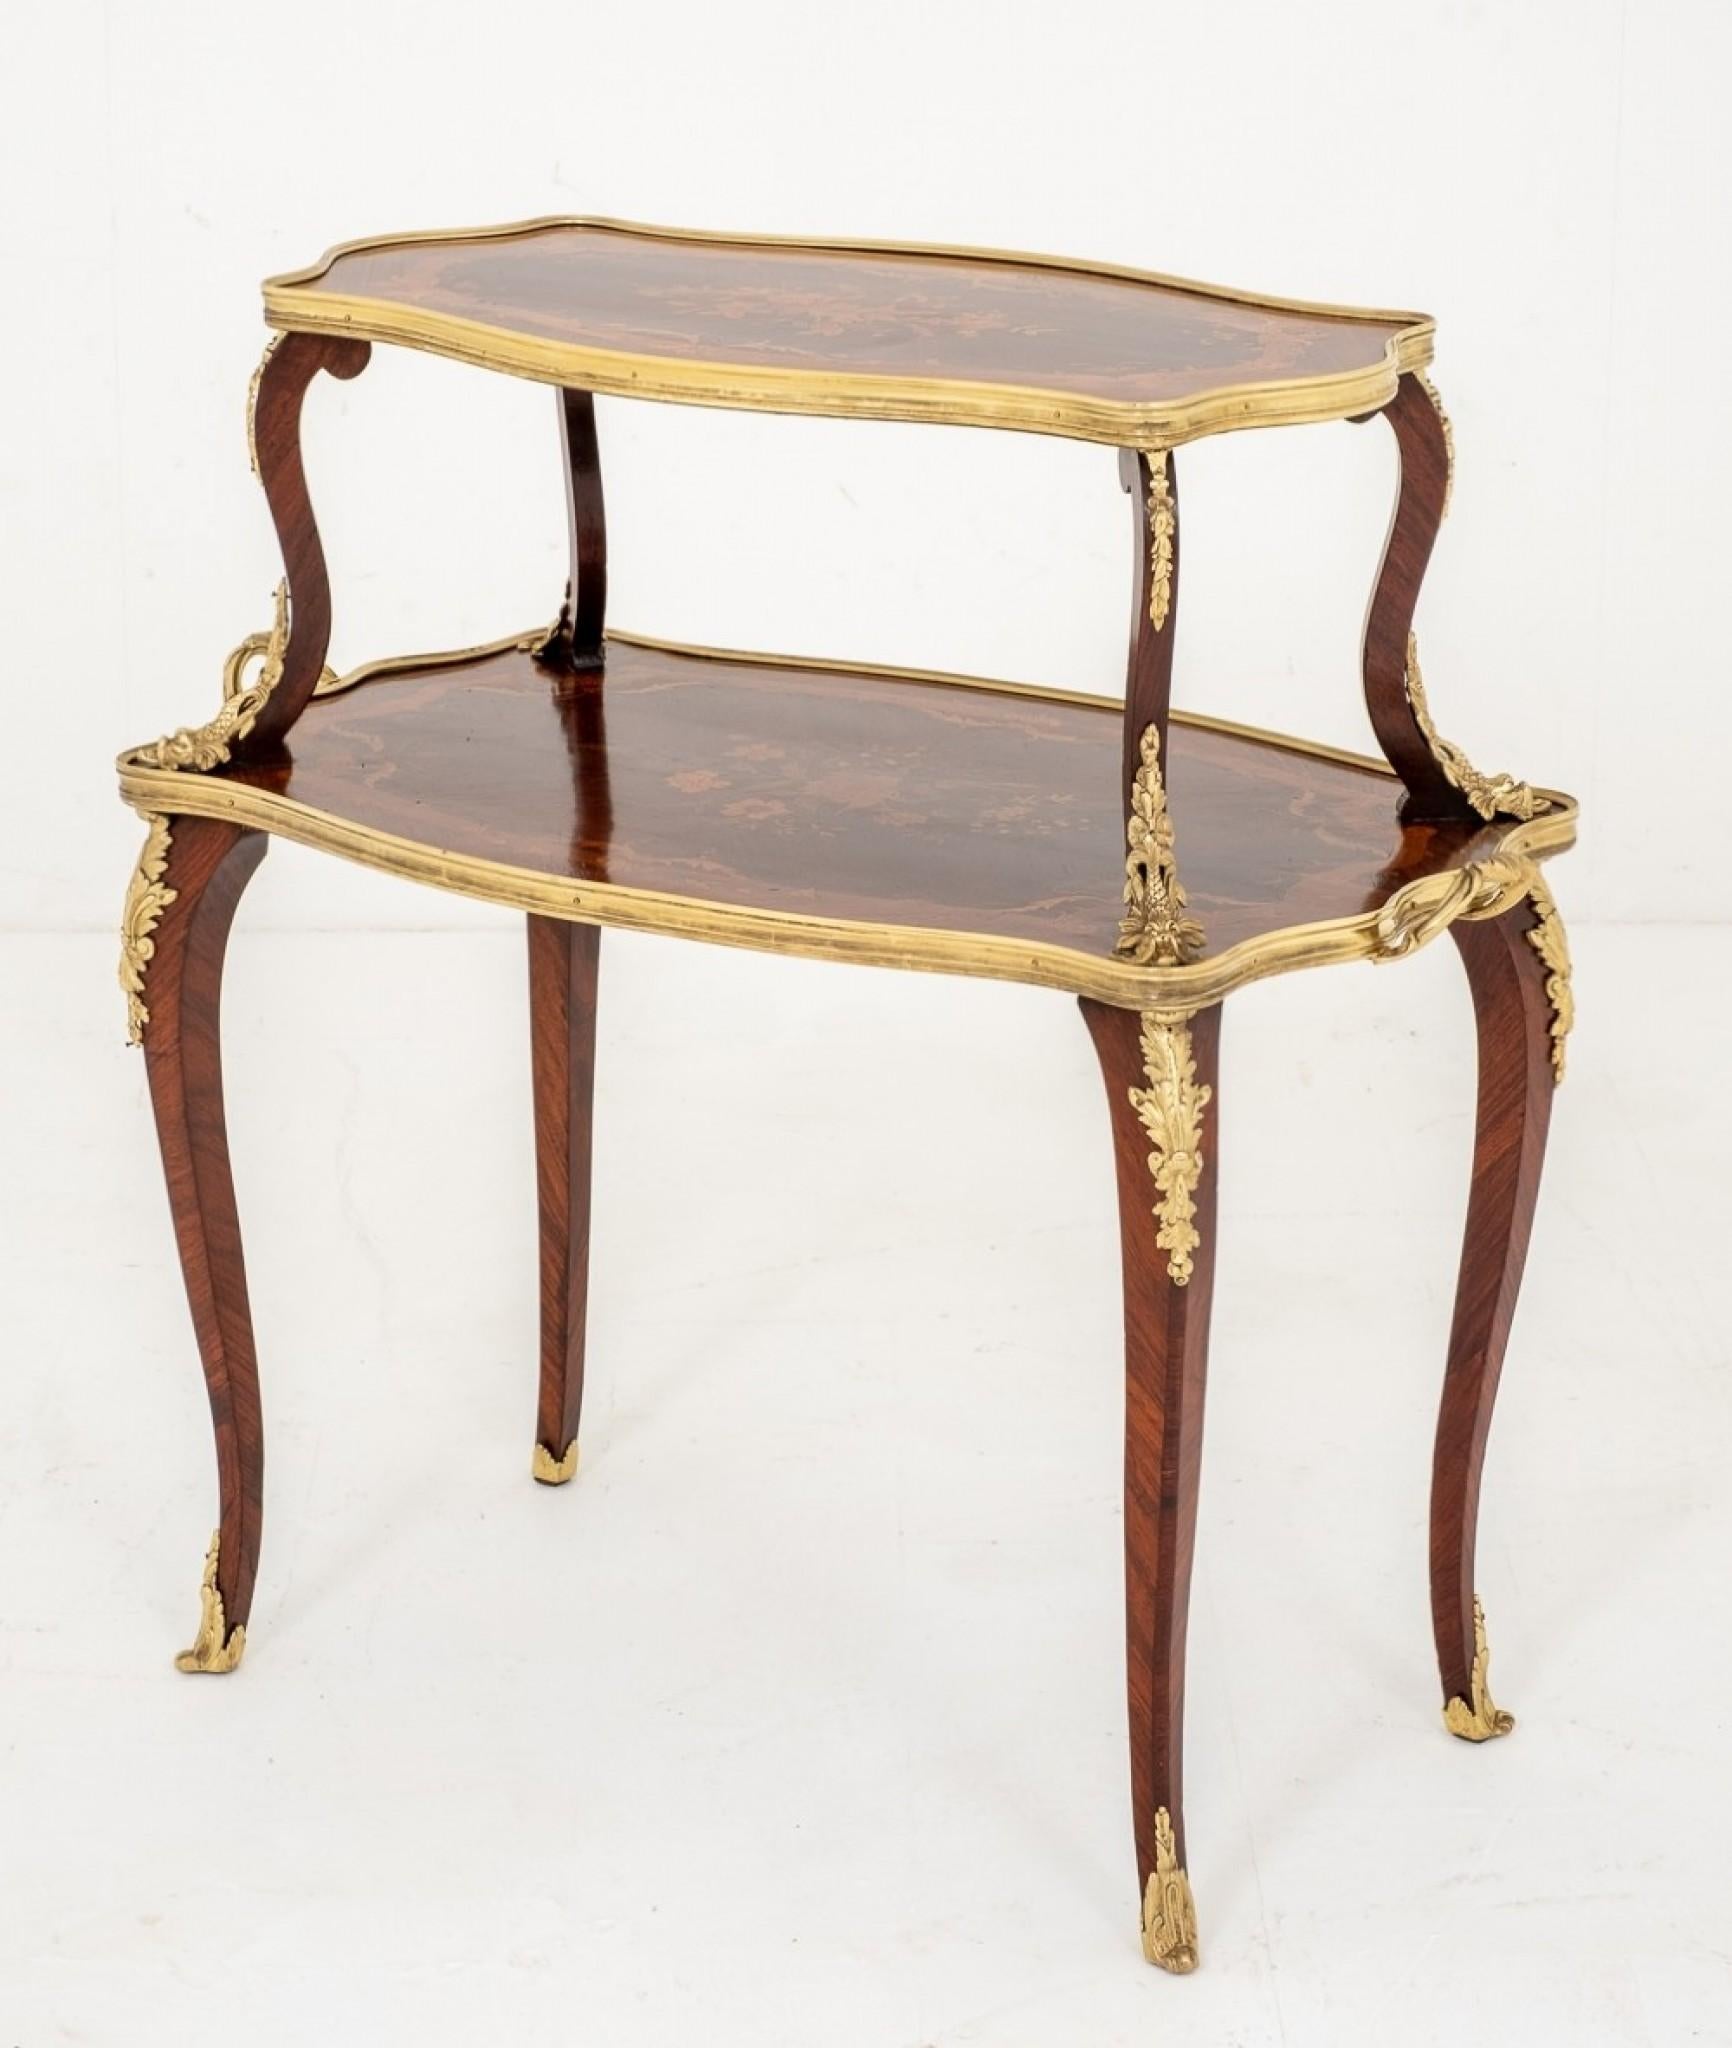 Pretty French Walnut and Marquetry Etagere.
circa 1900
Raised upon Elegant Swept legs with Gilt mounts to the feet and knees.
Both gilt mounted trays featuring beautiful floral Marquetry and double Crossbanding.